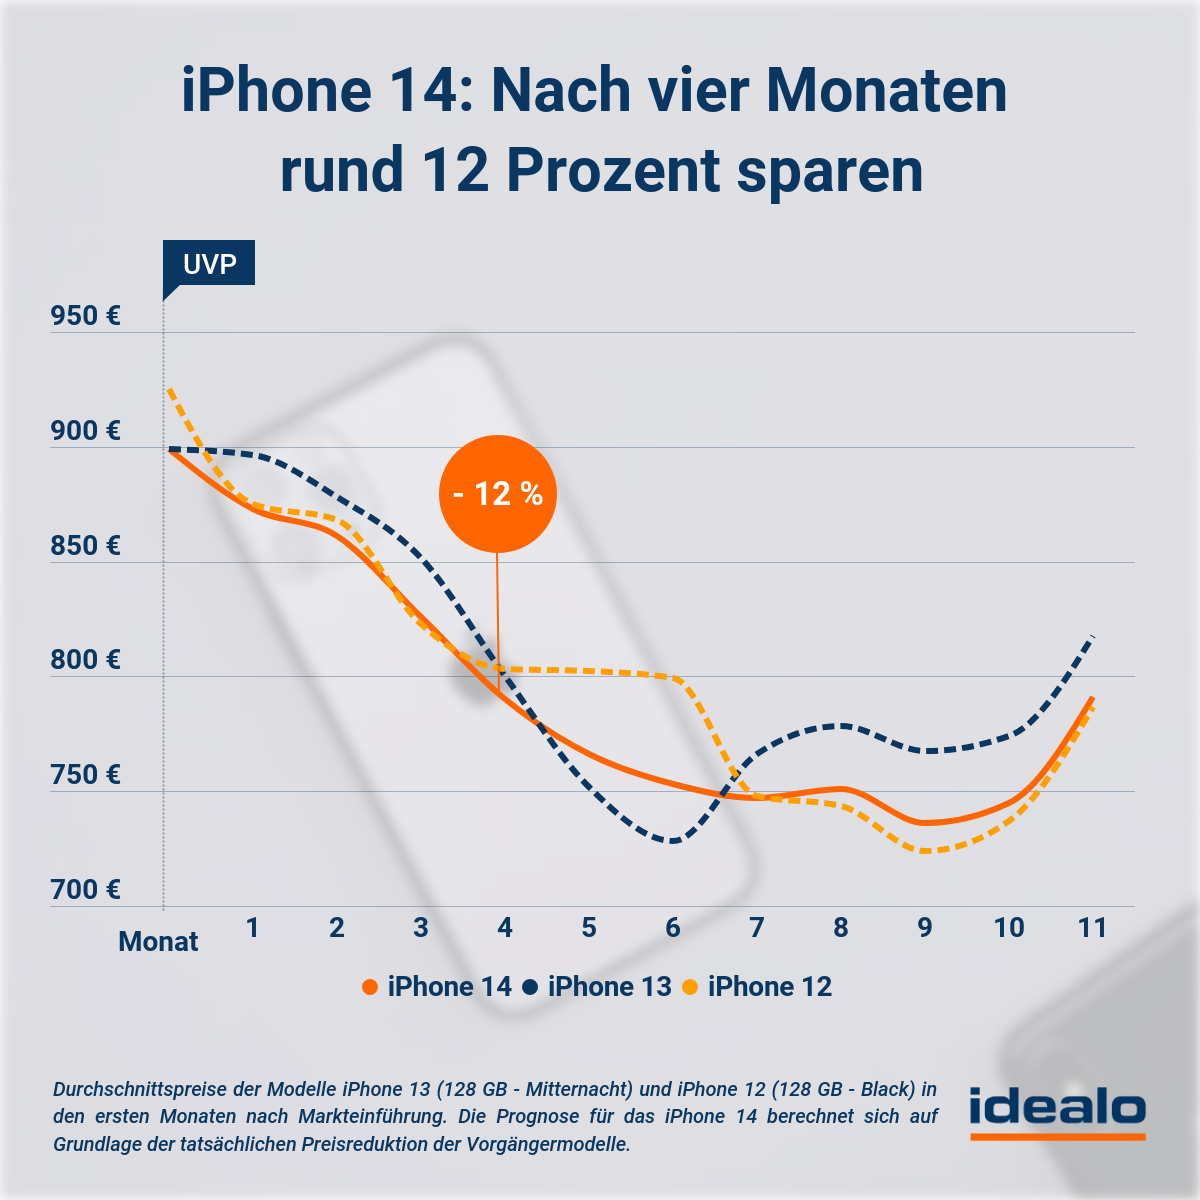 Iphone 14 | iPhone 14 Price Prediction: When is the Best Time to Buy? | apple iphone | iphone 14 preisprognose